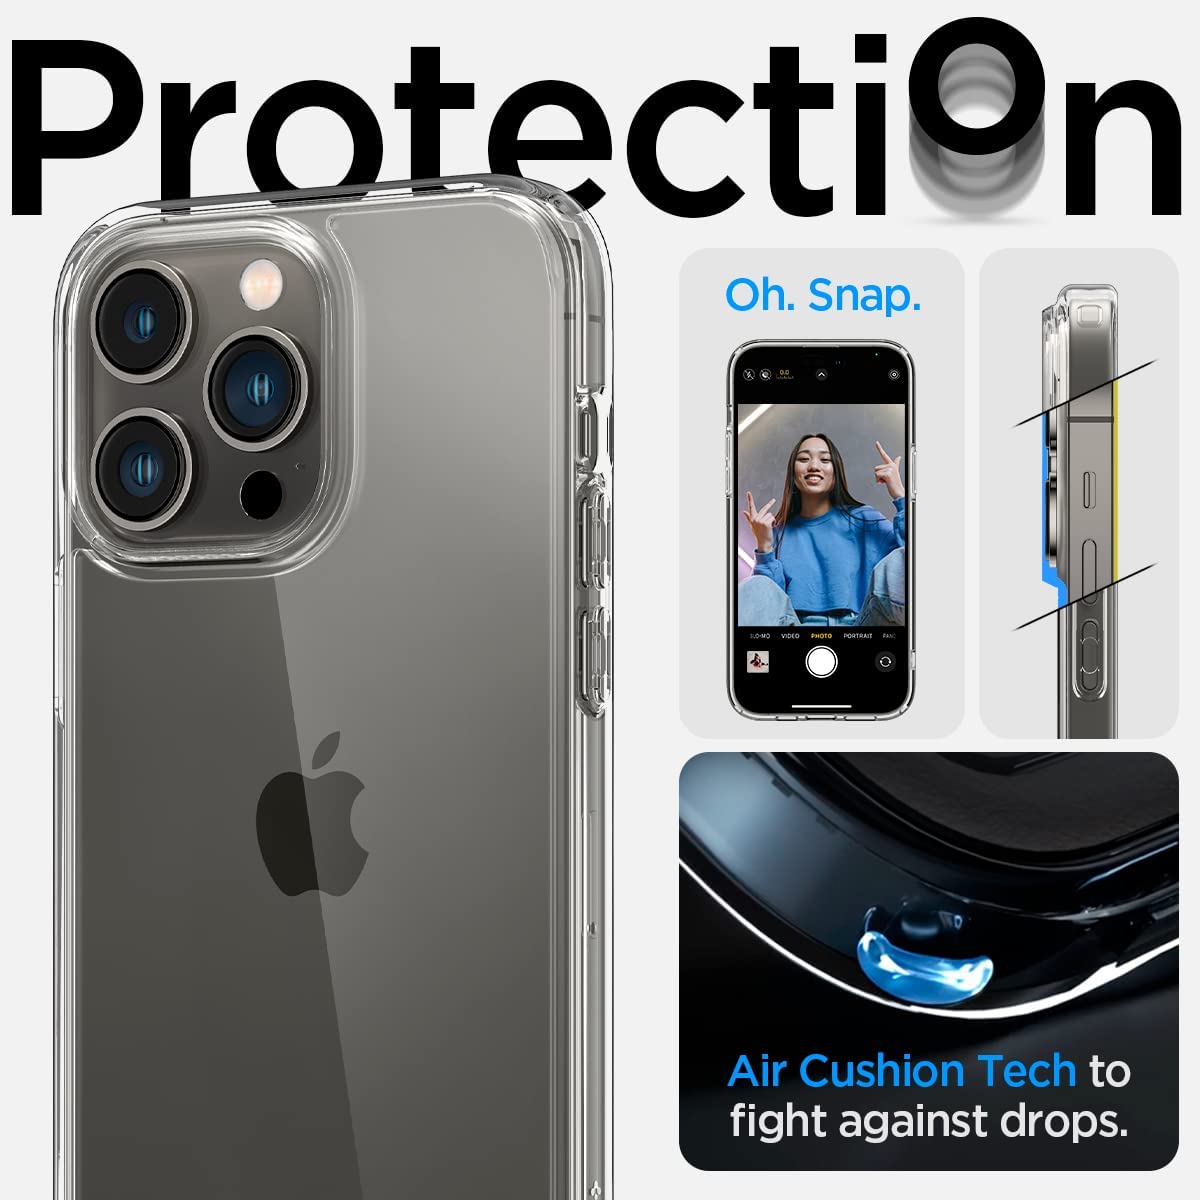 Spigen Ultra Hybrid [Anti-Yellowing Technology] Designed for iPhone 14 Pro / Pro Max Case (2022) - Crystal Clear